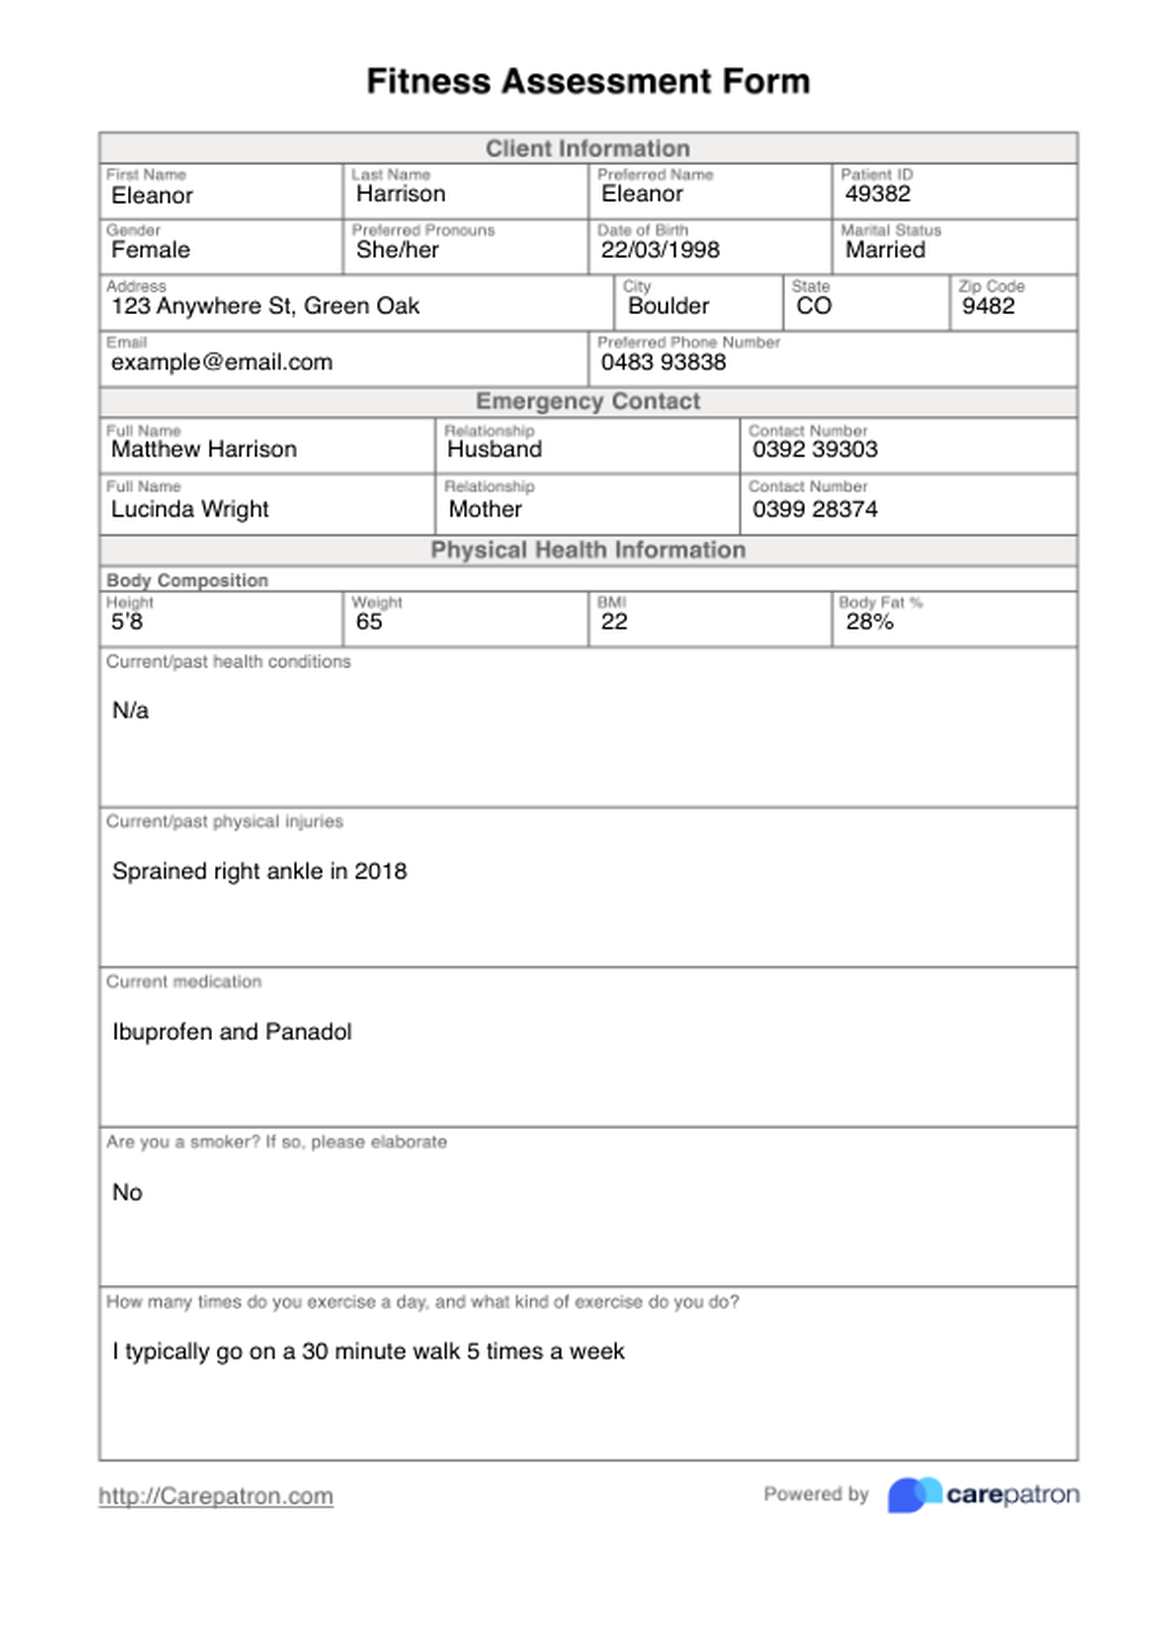 Fitness Assessment Form PDF Example